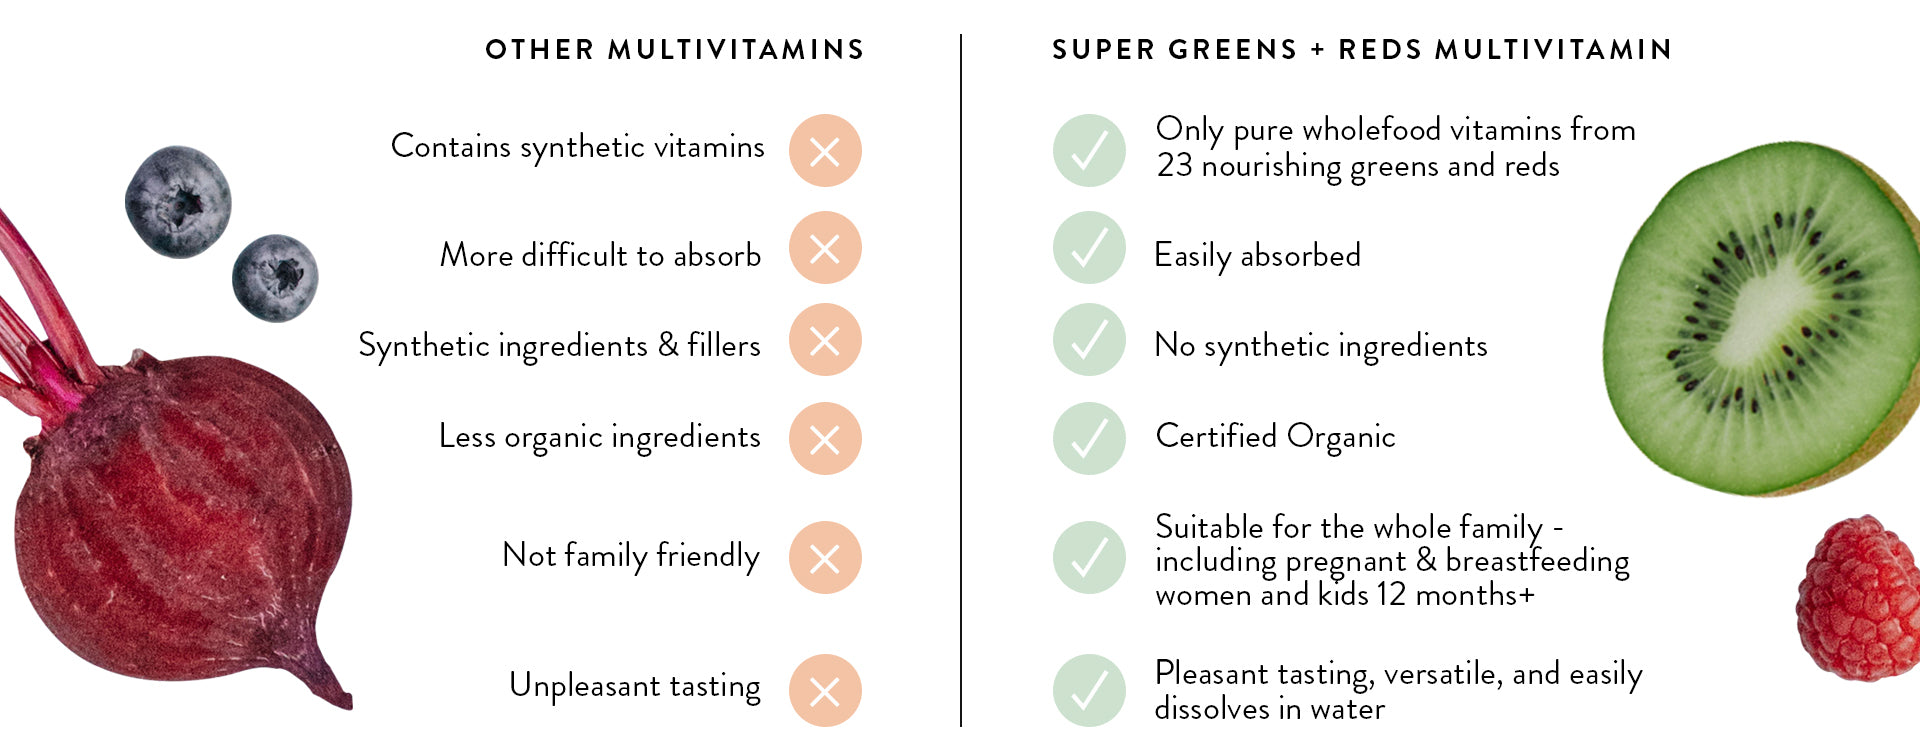 Table comparing our plant based wholefoods Super Greens + Reds with other multivitamins containing synthetics